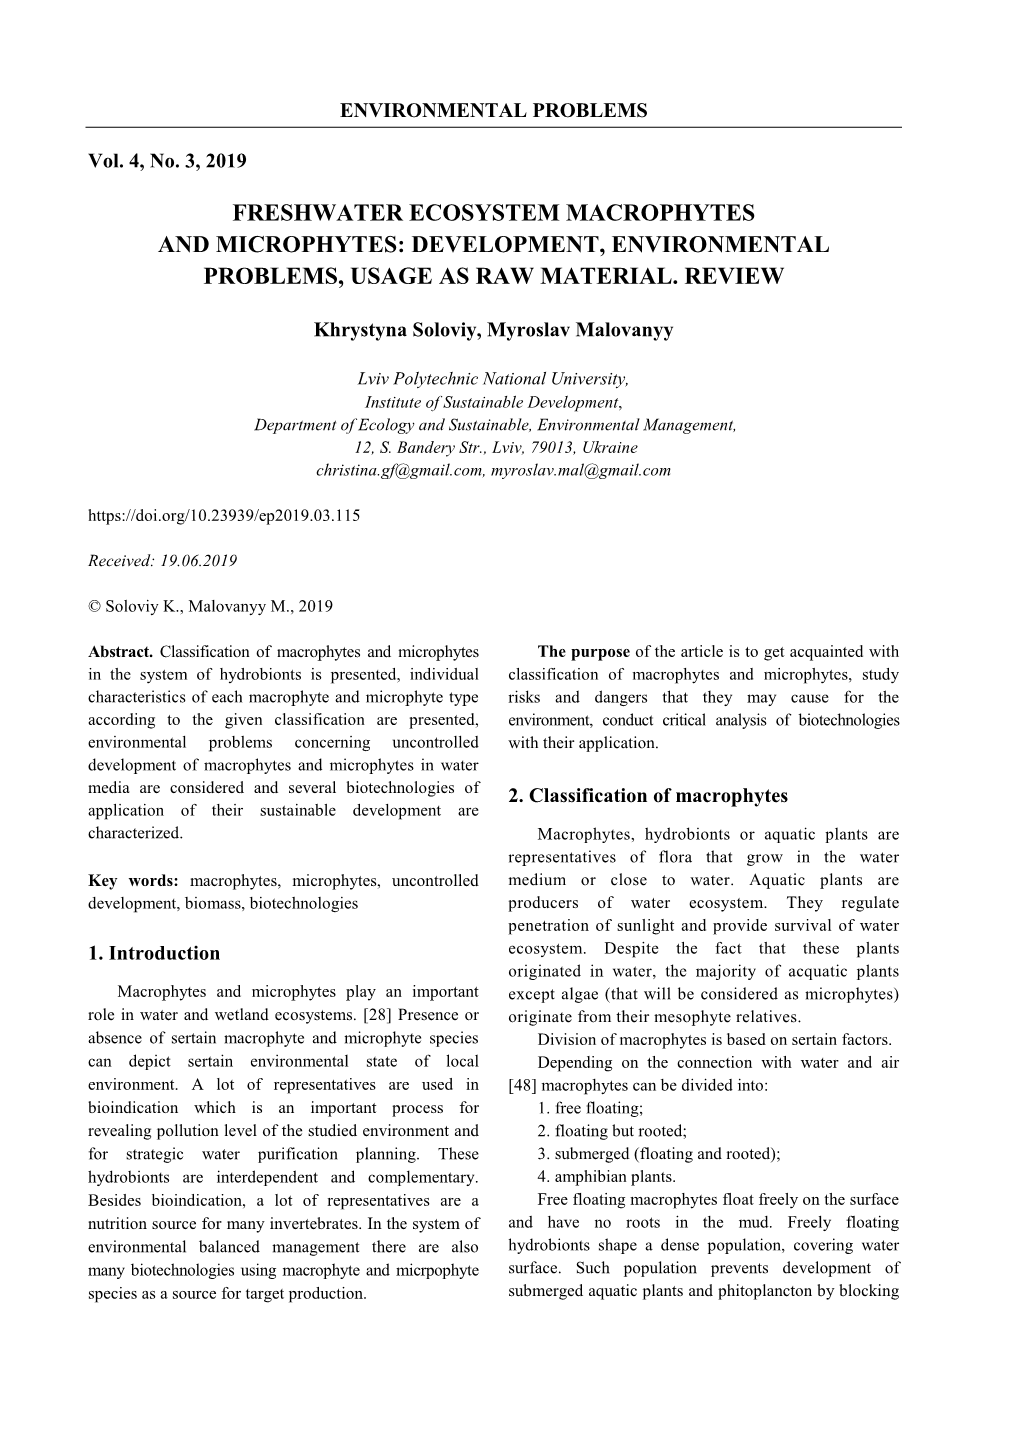 Freshwater Ecosystem Macrophytes and Microphytes: Development, Environmental Problems, Usage As Raw Material